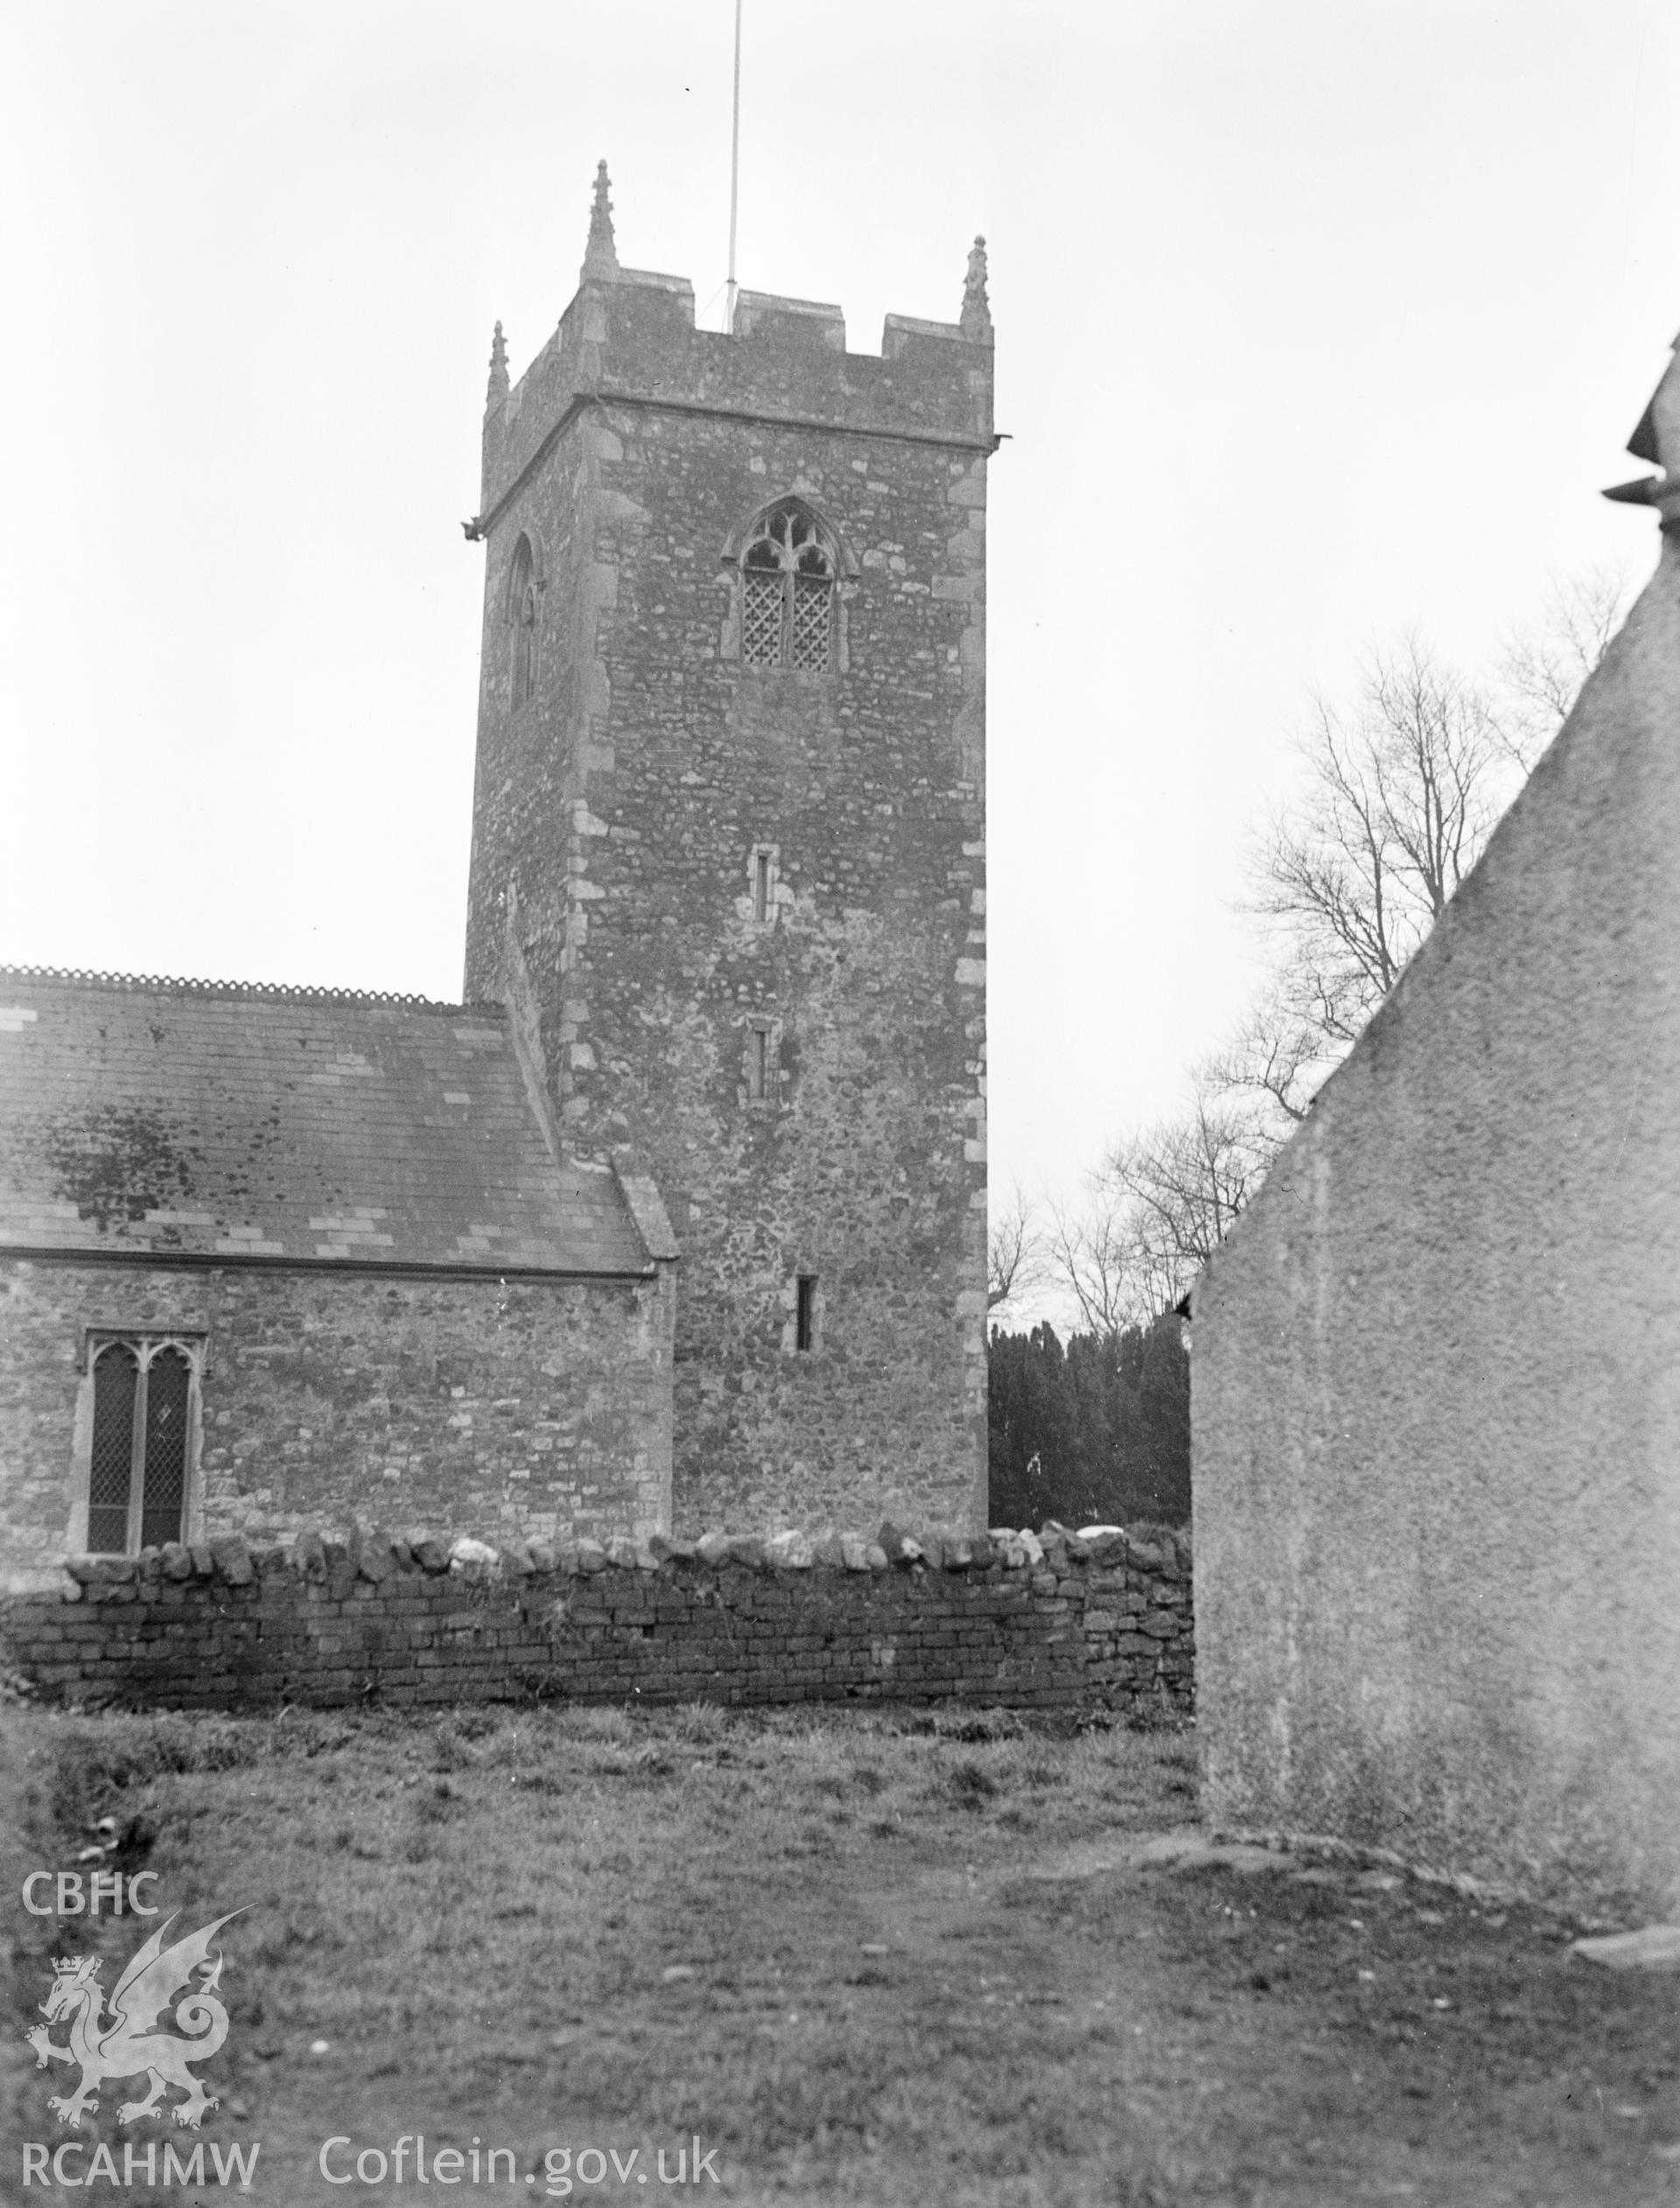 Digital copy of a nitrate negative showing exterior view of side elevation of church and tower, St Augustine's Church, Rumney, taken circa 1936. From the National Building Record Postcard Collection.